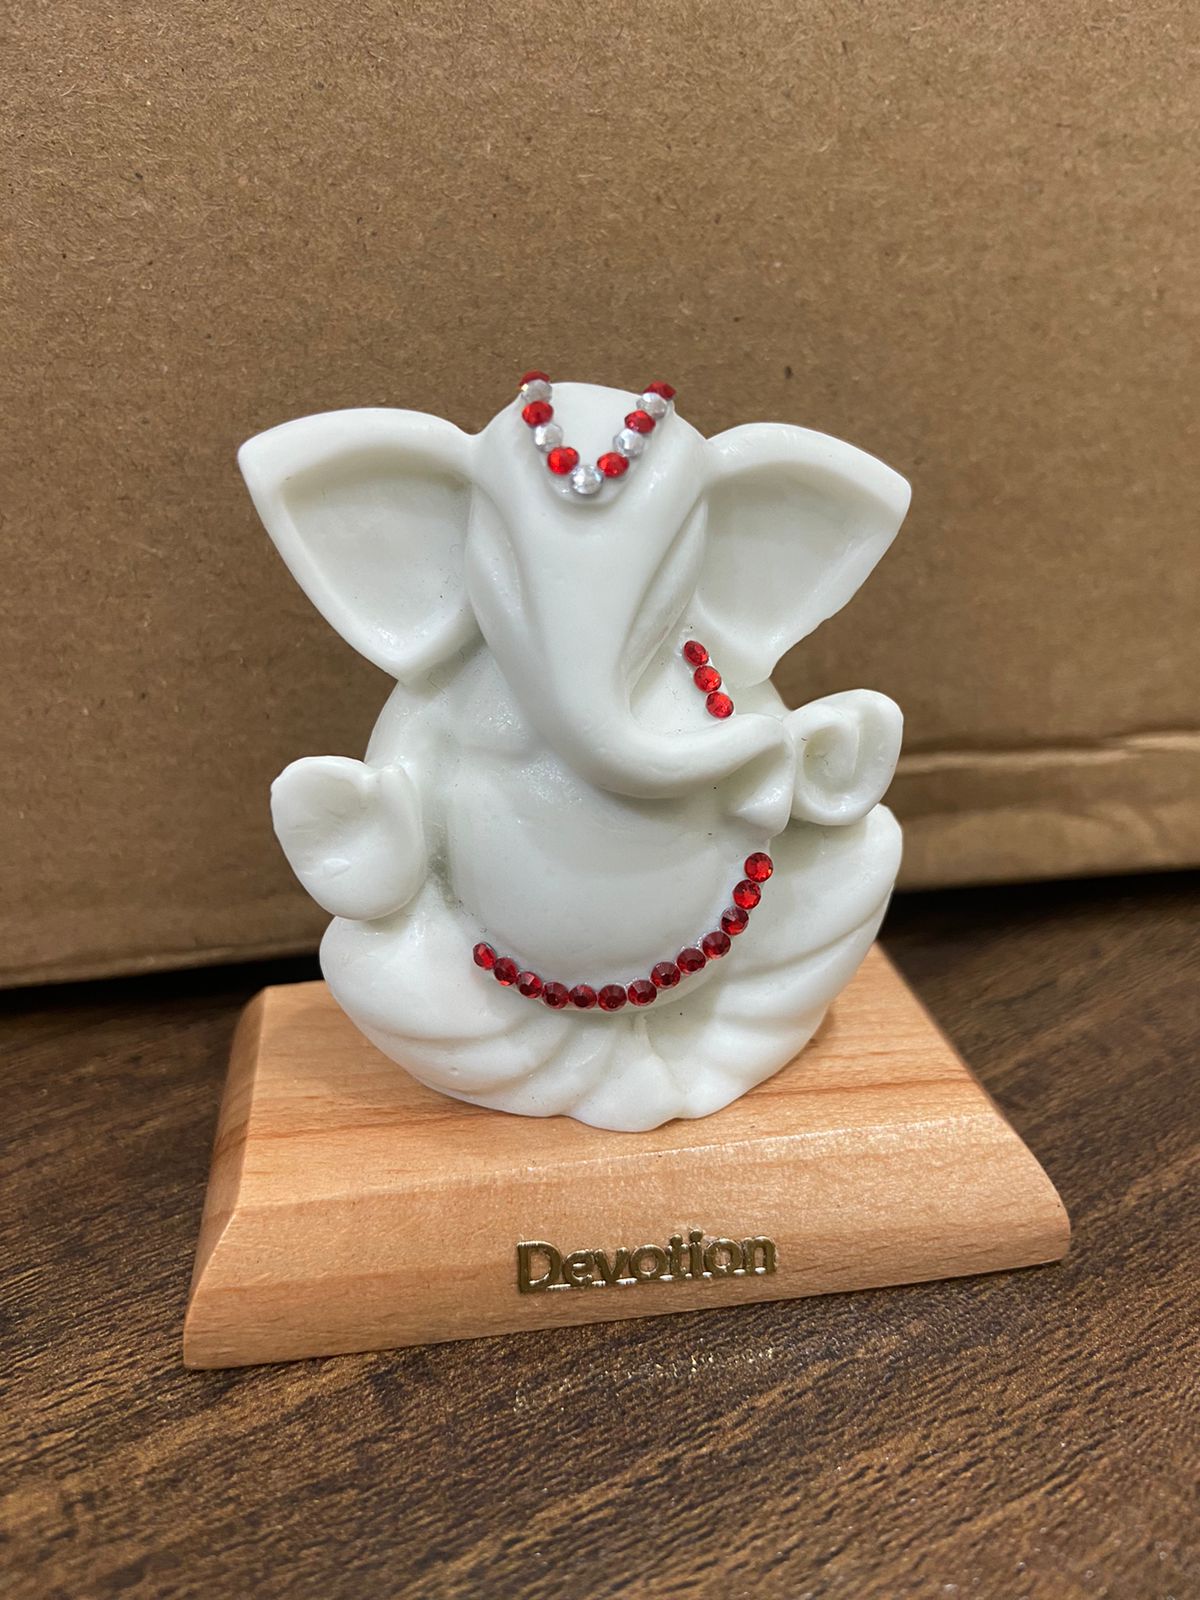 Marble Tilak Ganesh Idol for Car Dashboard with Double Sided Tape for Small Pooja Home Gift Office Study Table Décor-3.5 Inch, White (Handcrafted in India)